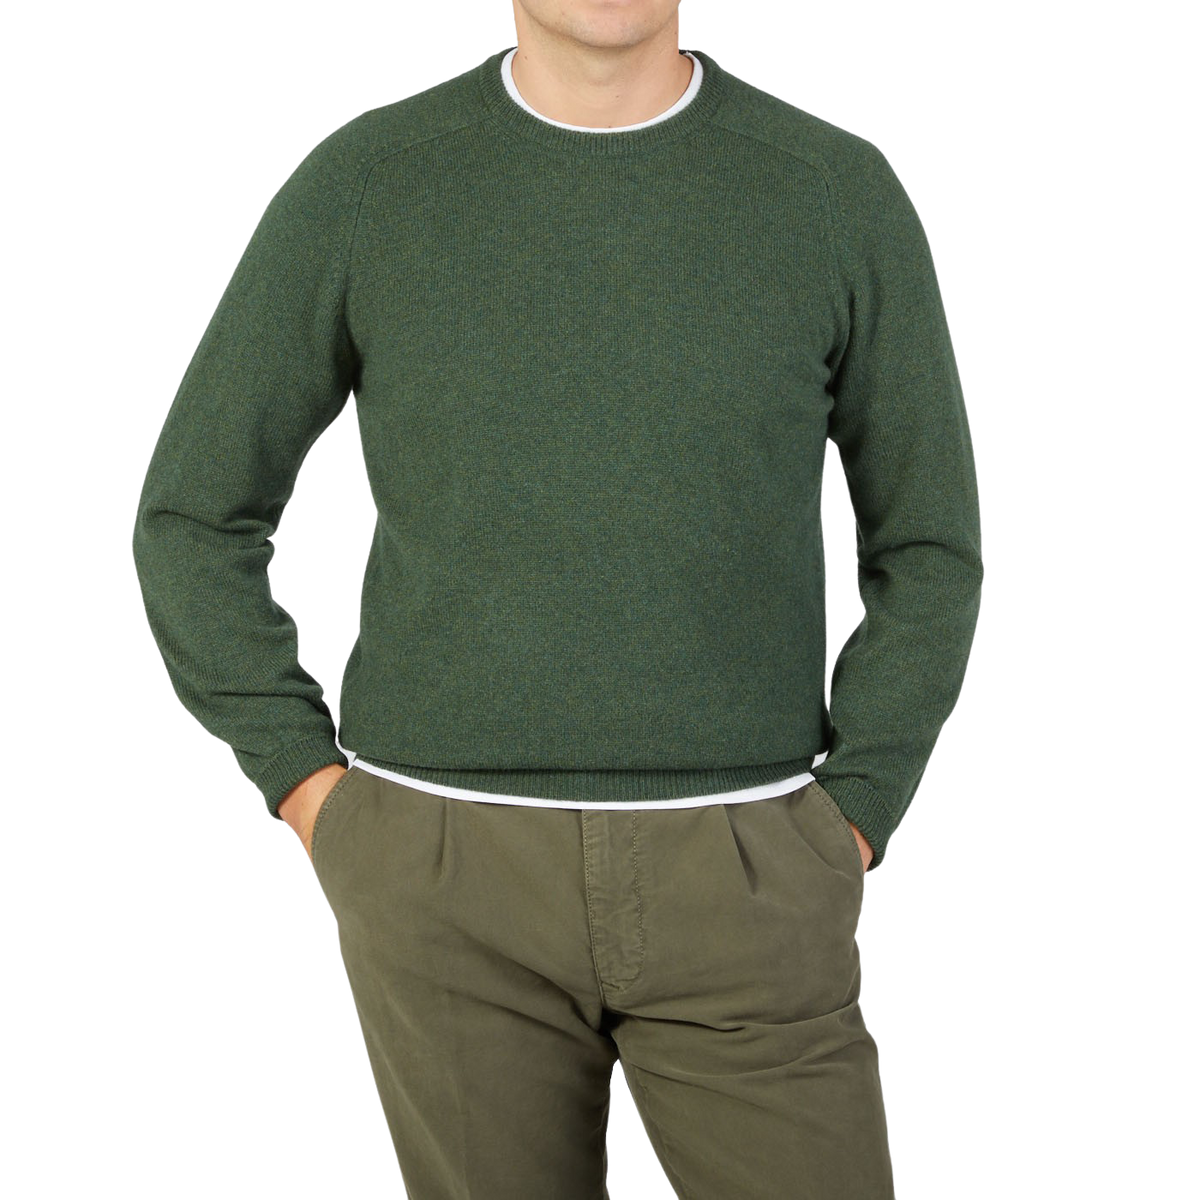 A man wearing an Alan Paine Rosemary Green Lambswool Crew Neck sweater, paired with khaki pants.